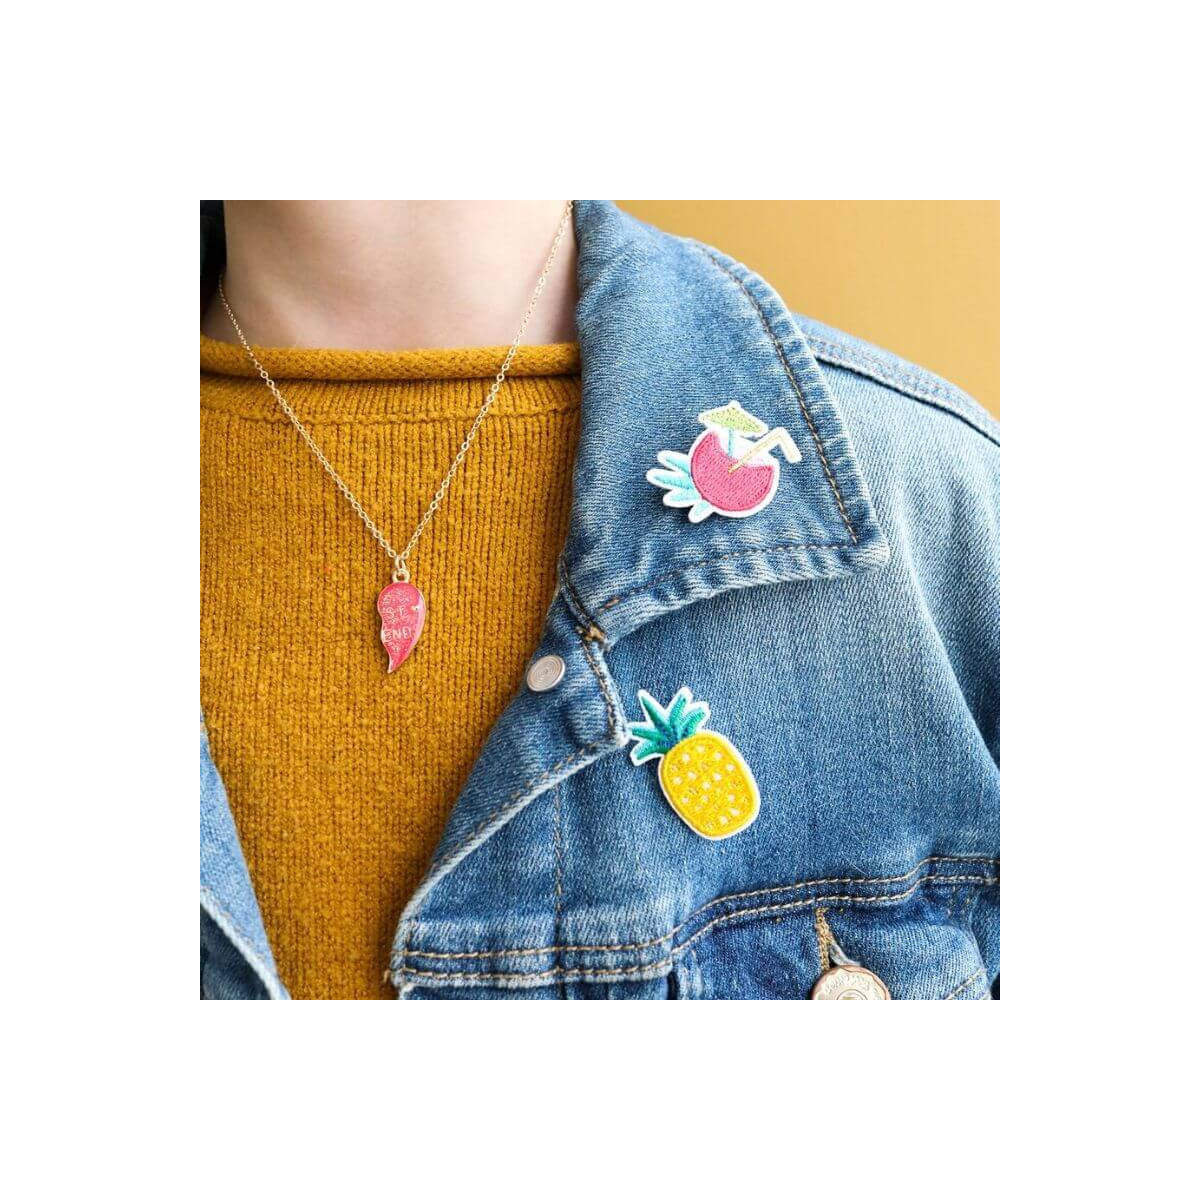 Best friends necklaces to share